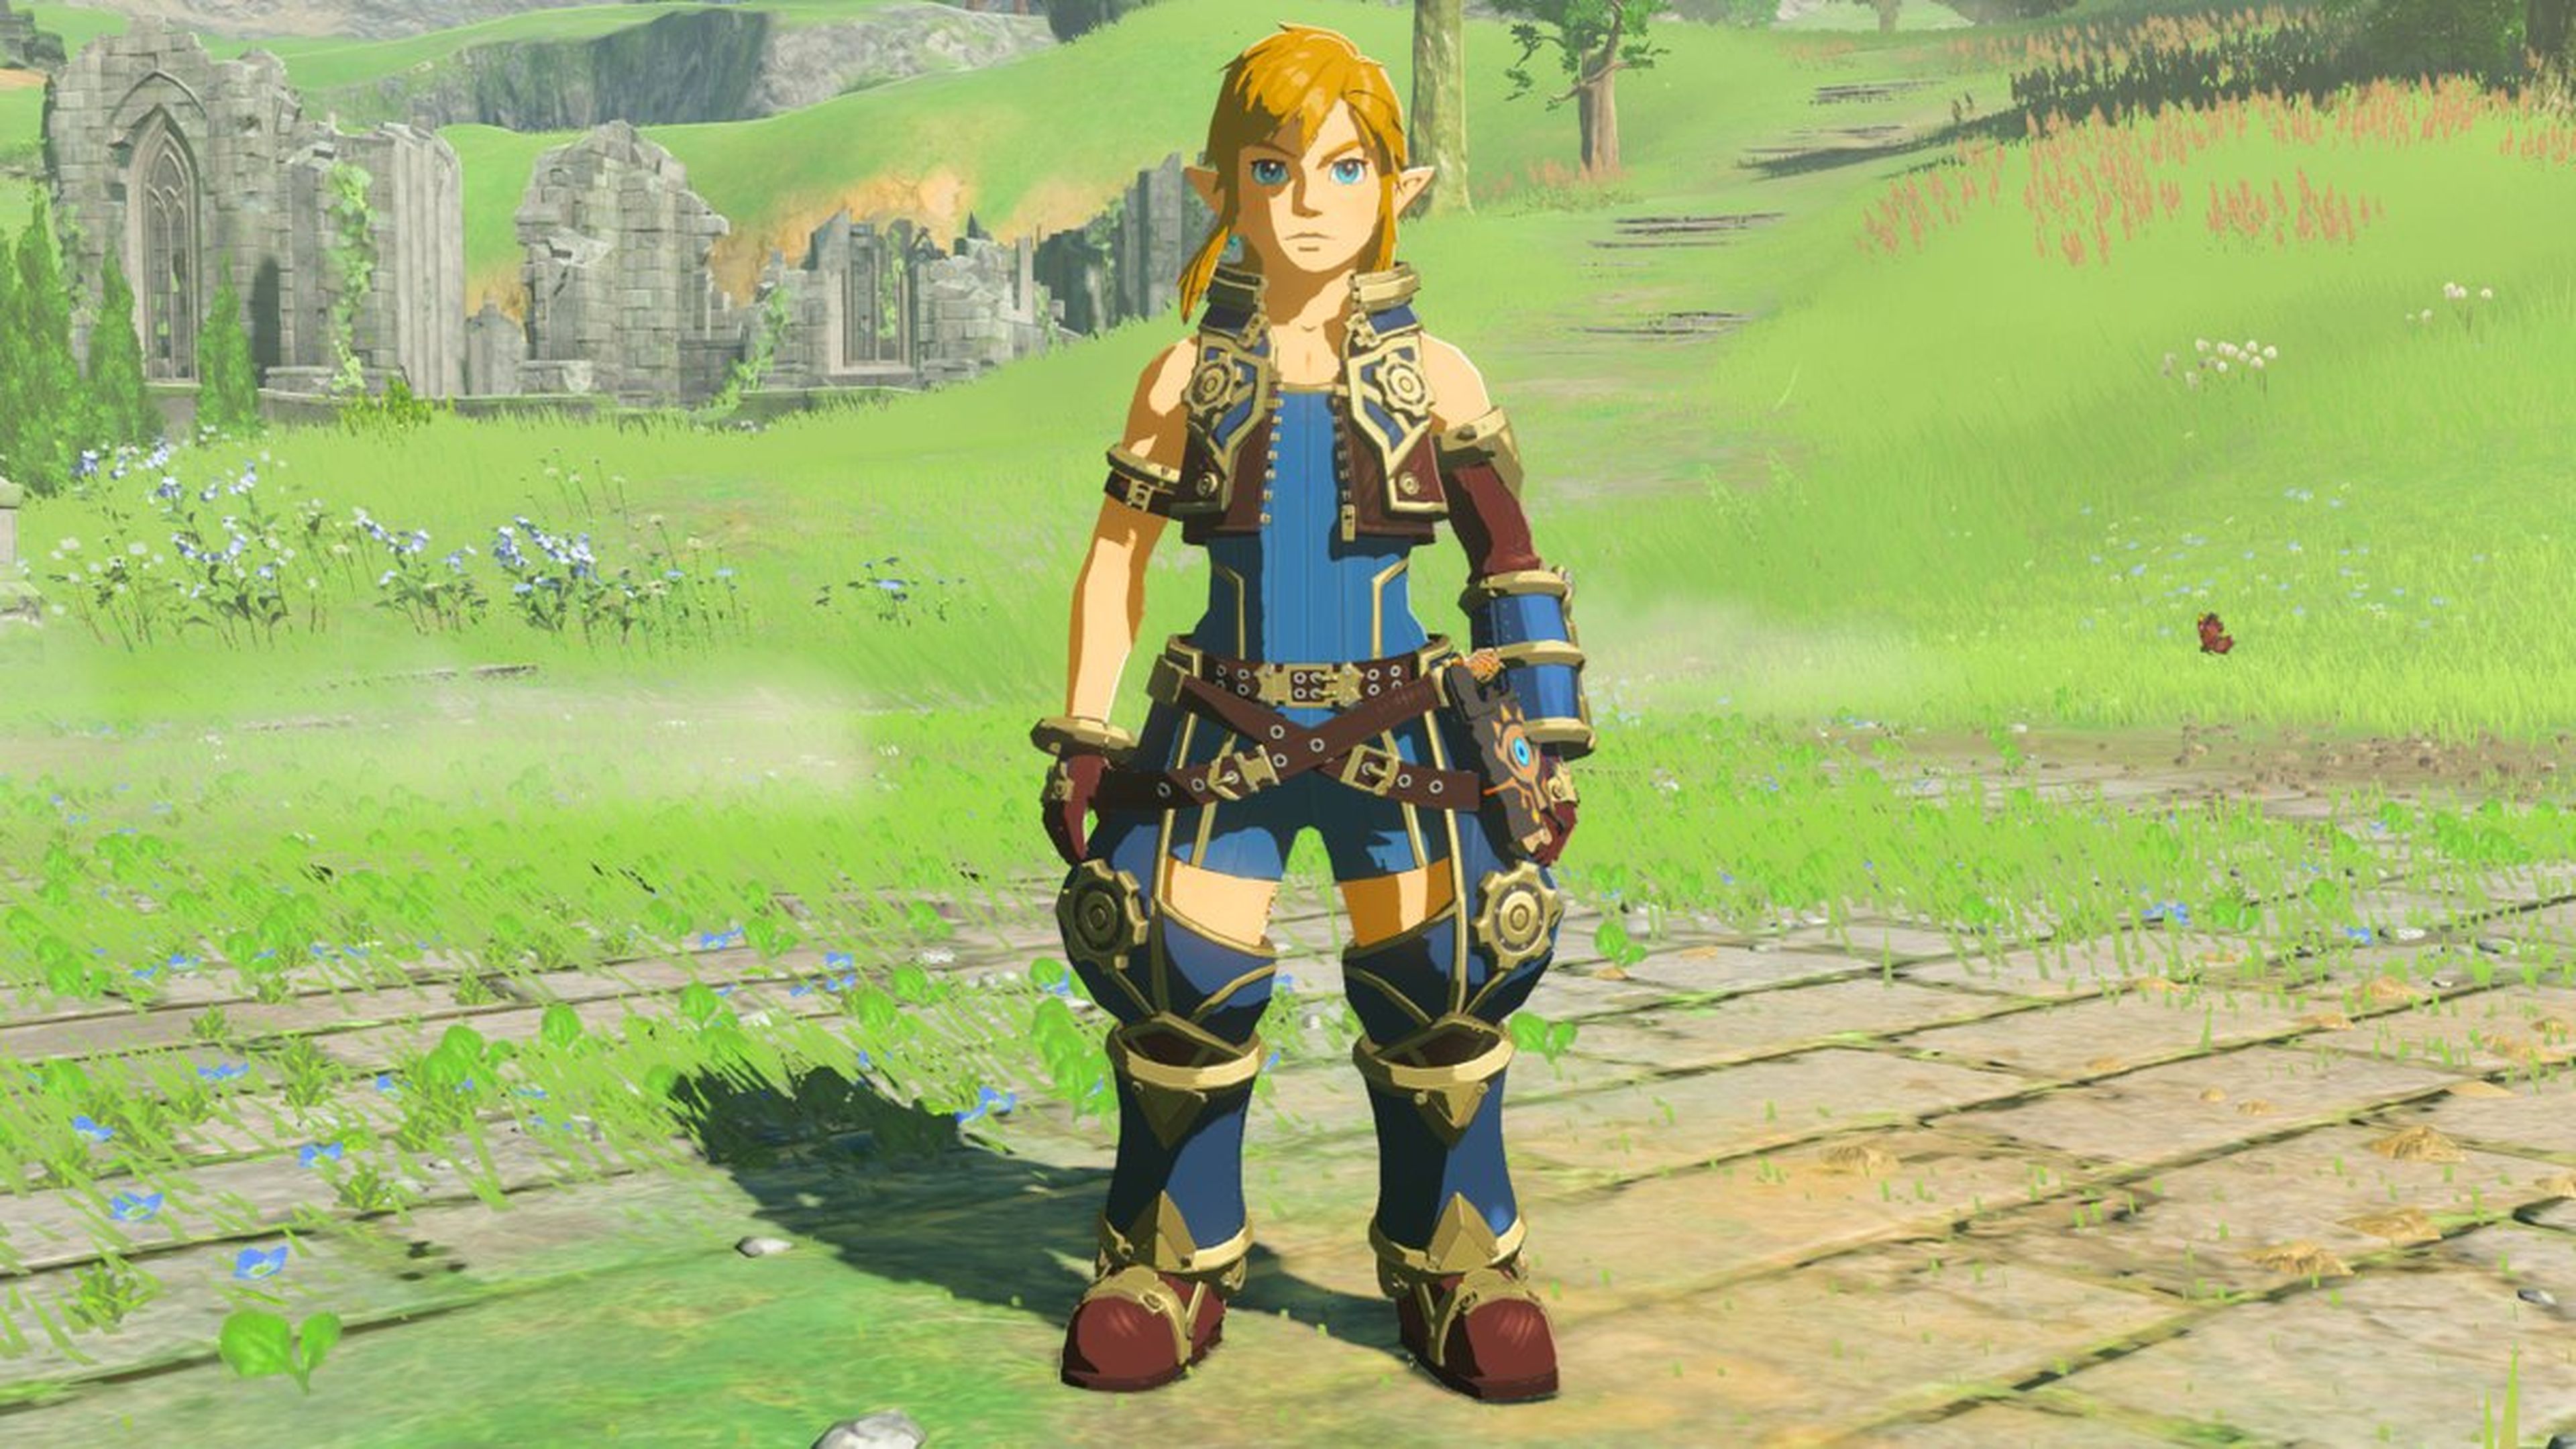 Xenoblade Chronicles 2 x The Legend of Zelda Breath of the Wild